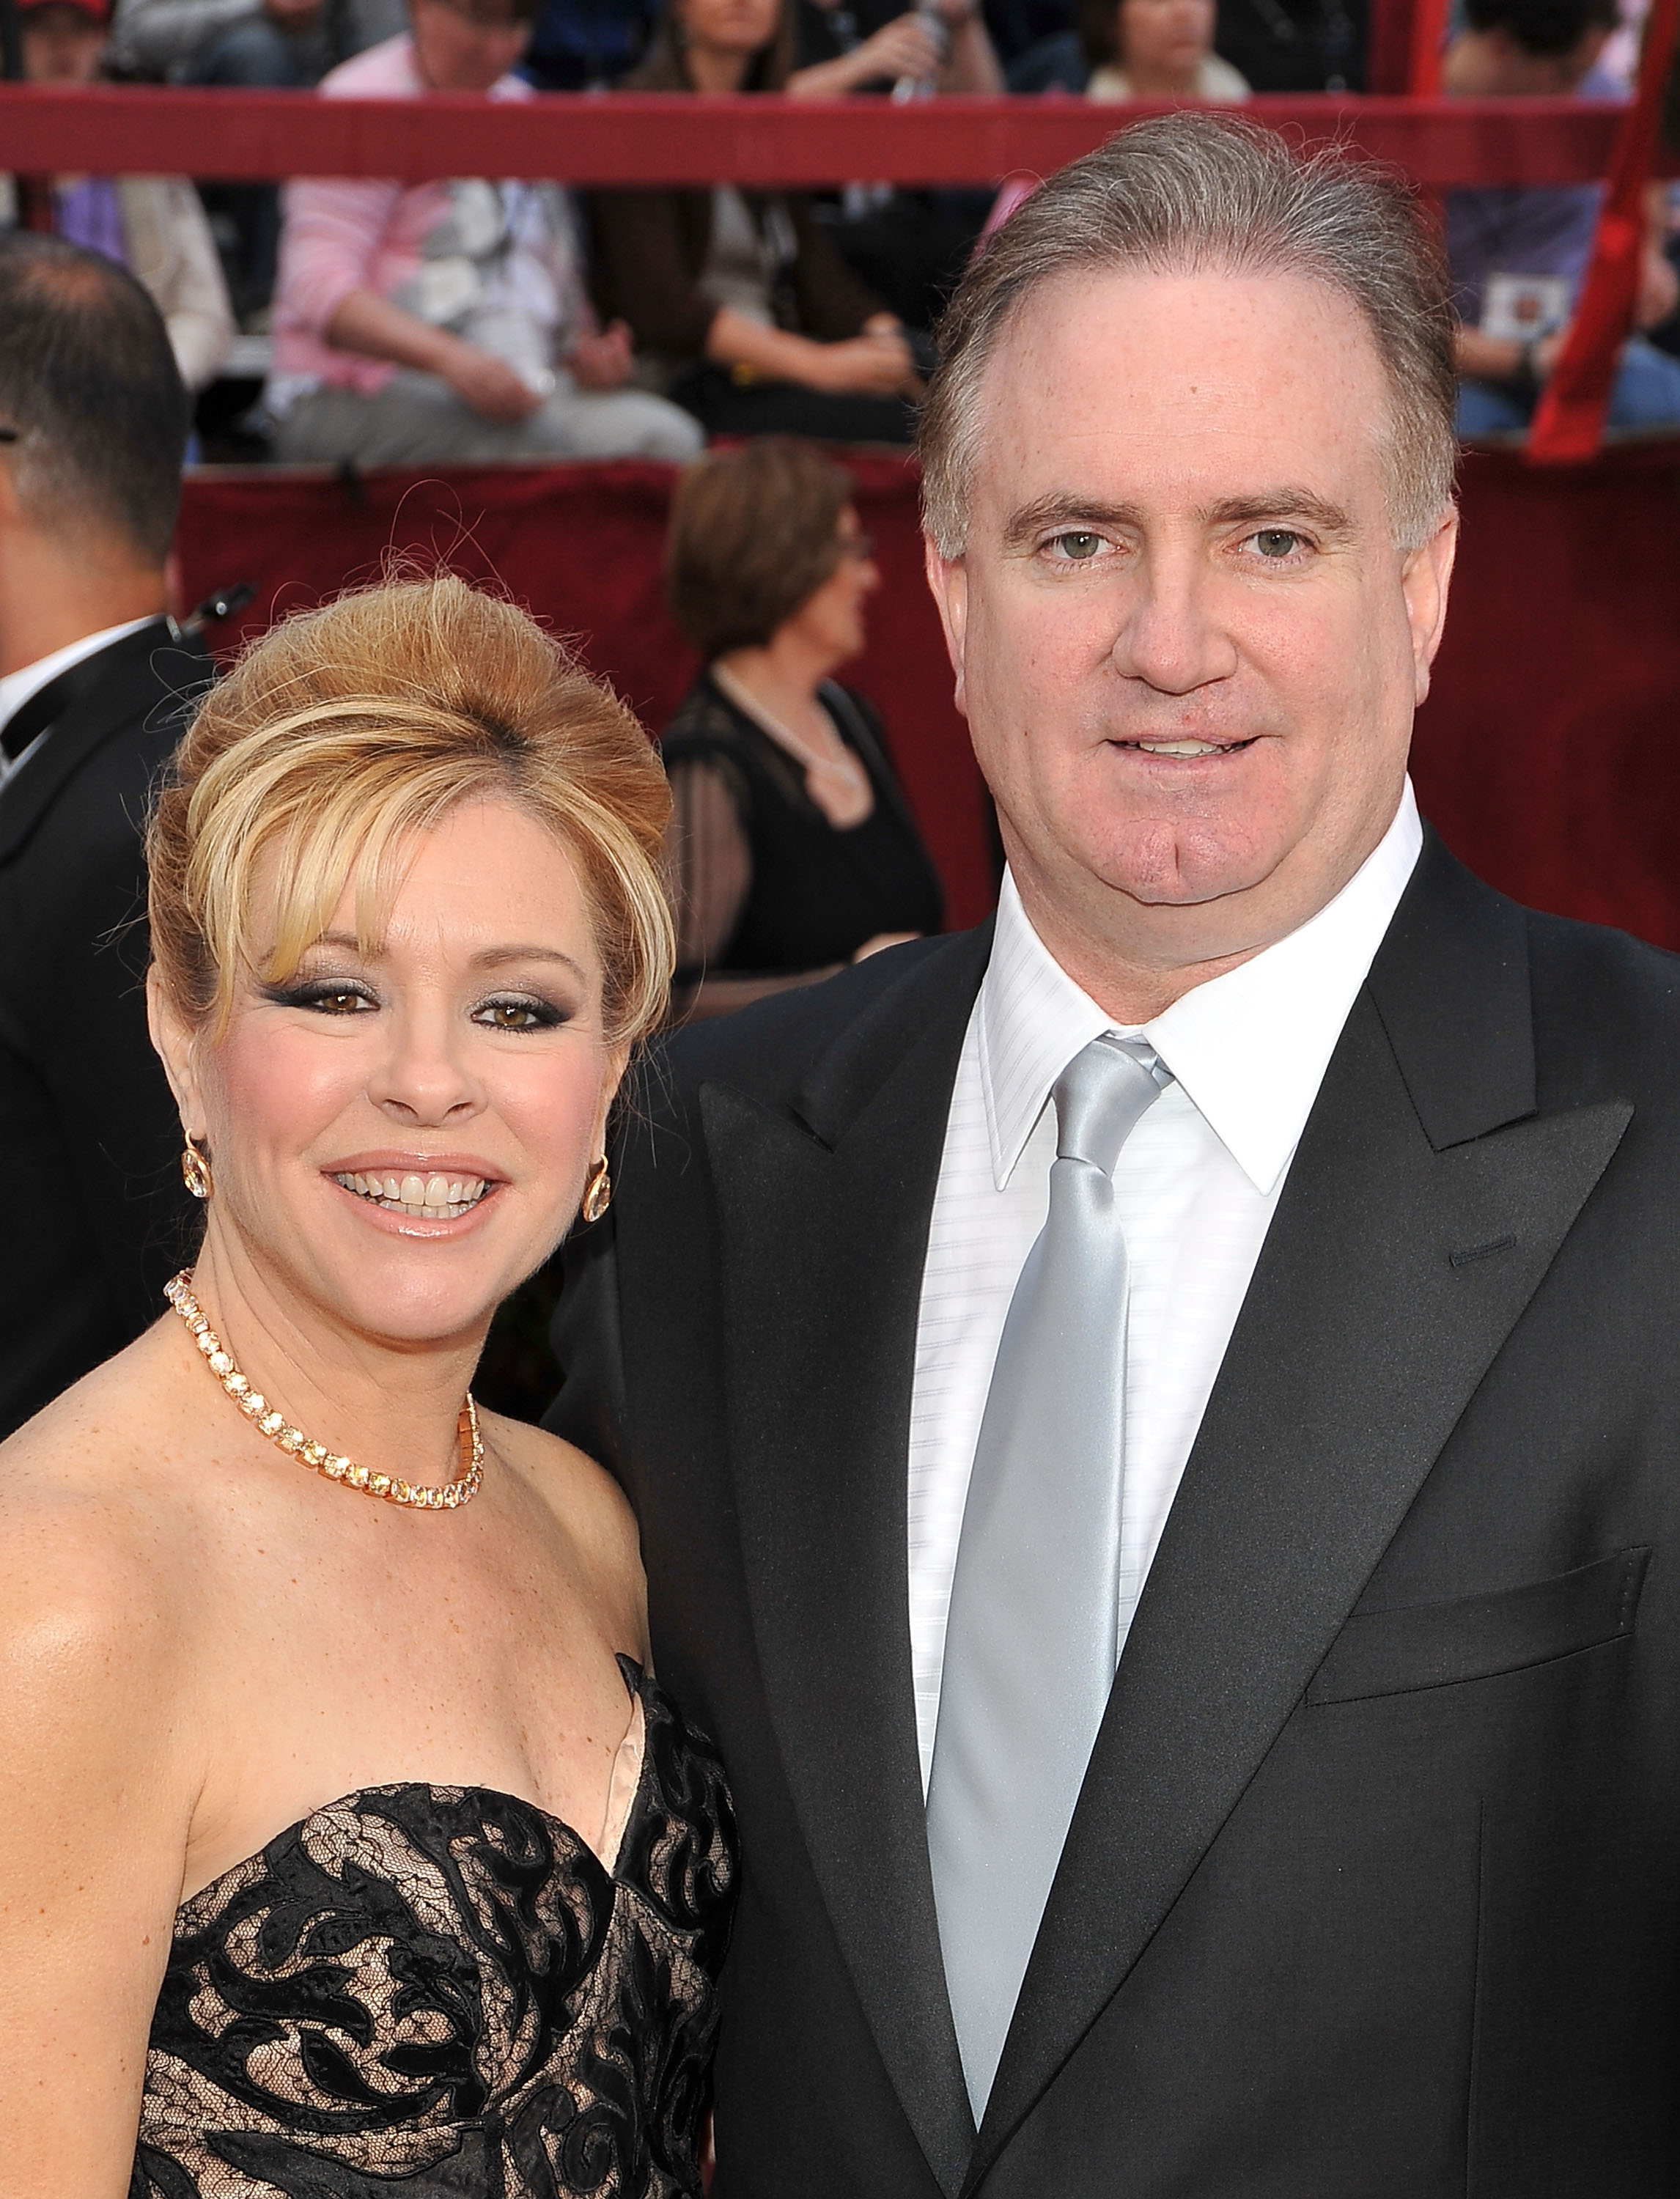 A closeup of Leigh Anne and Sean Tuohy at a formal event